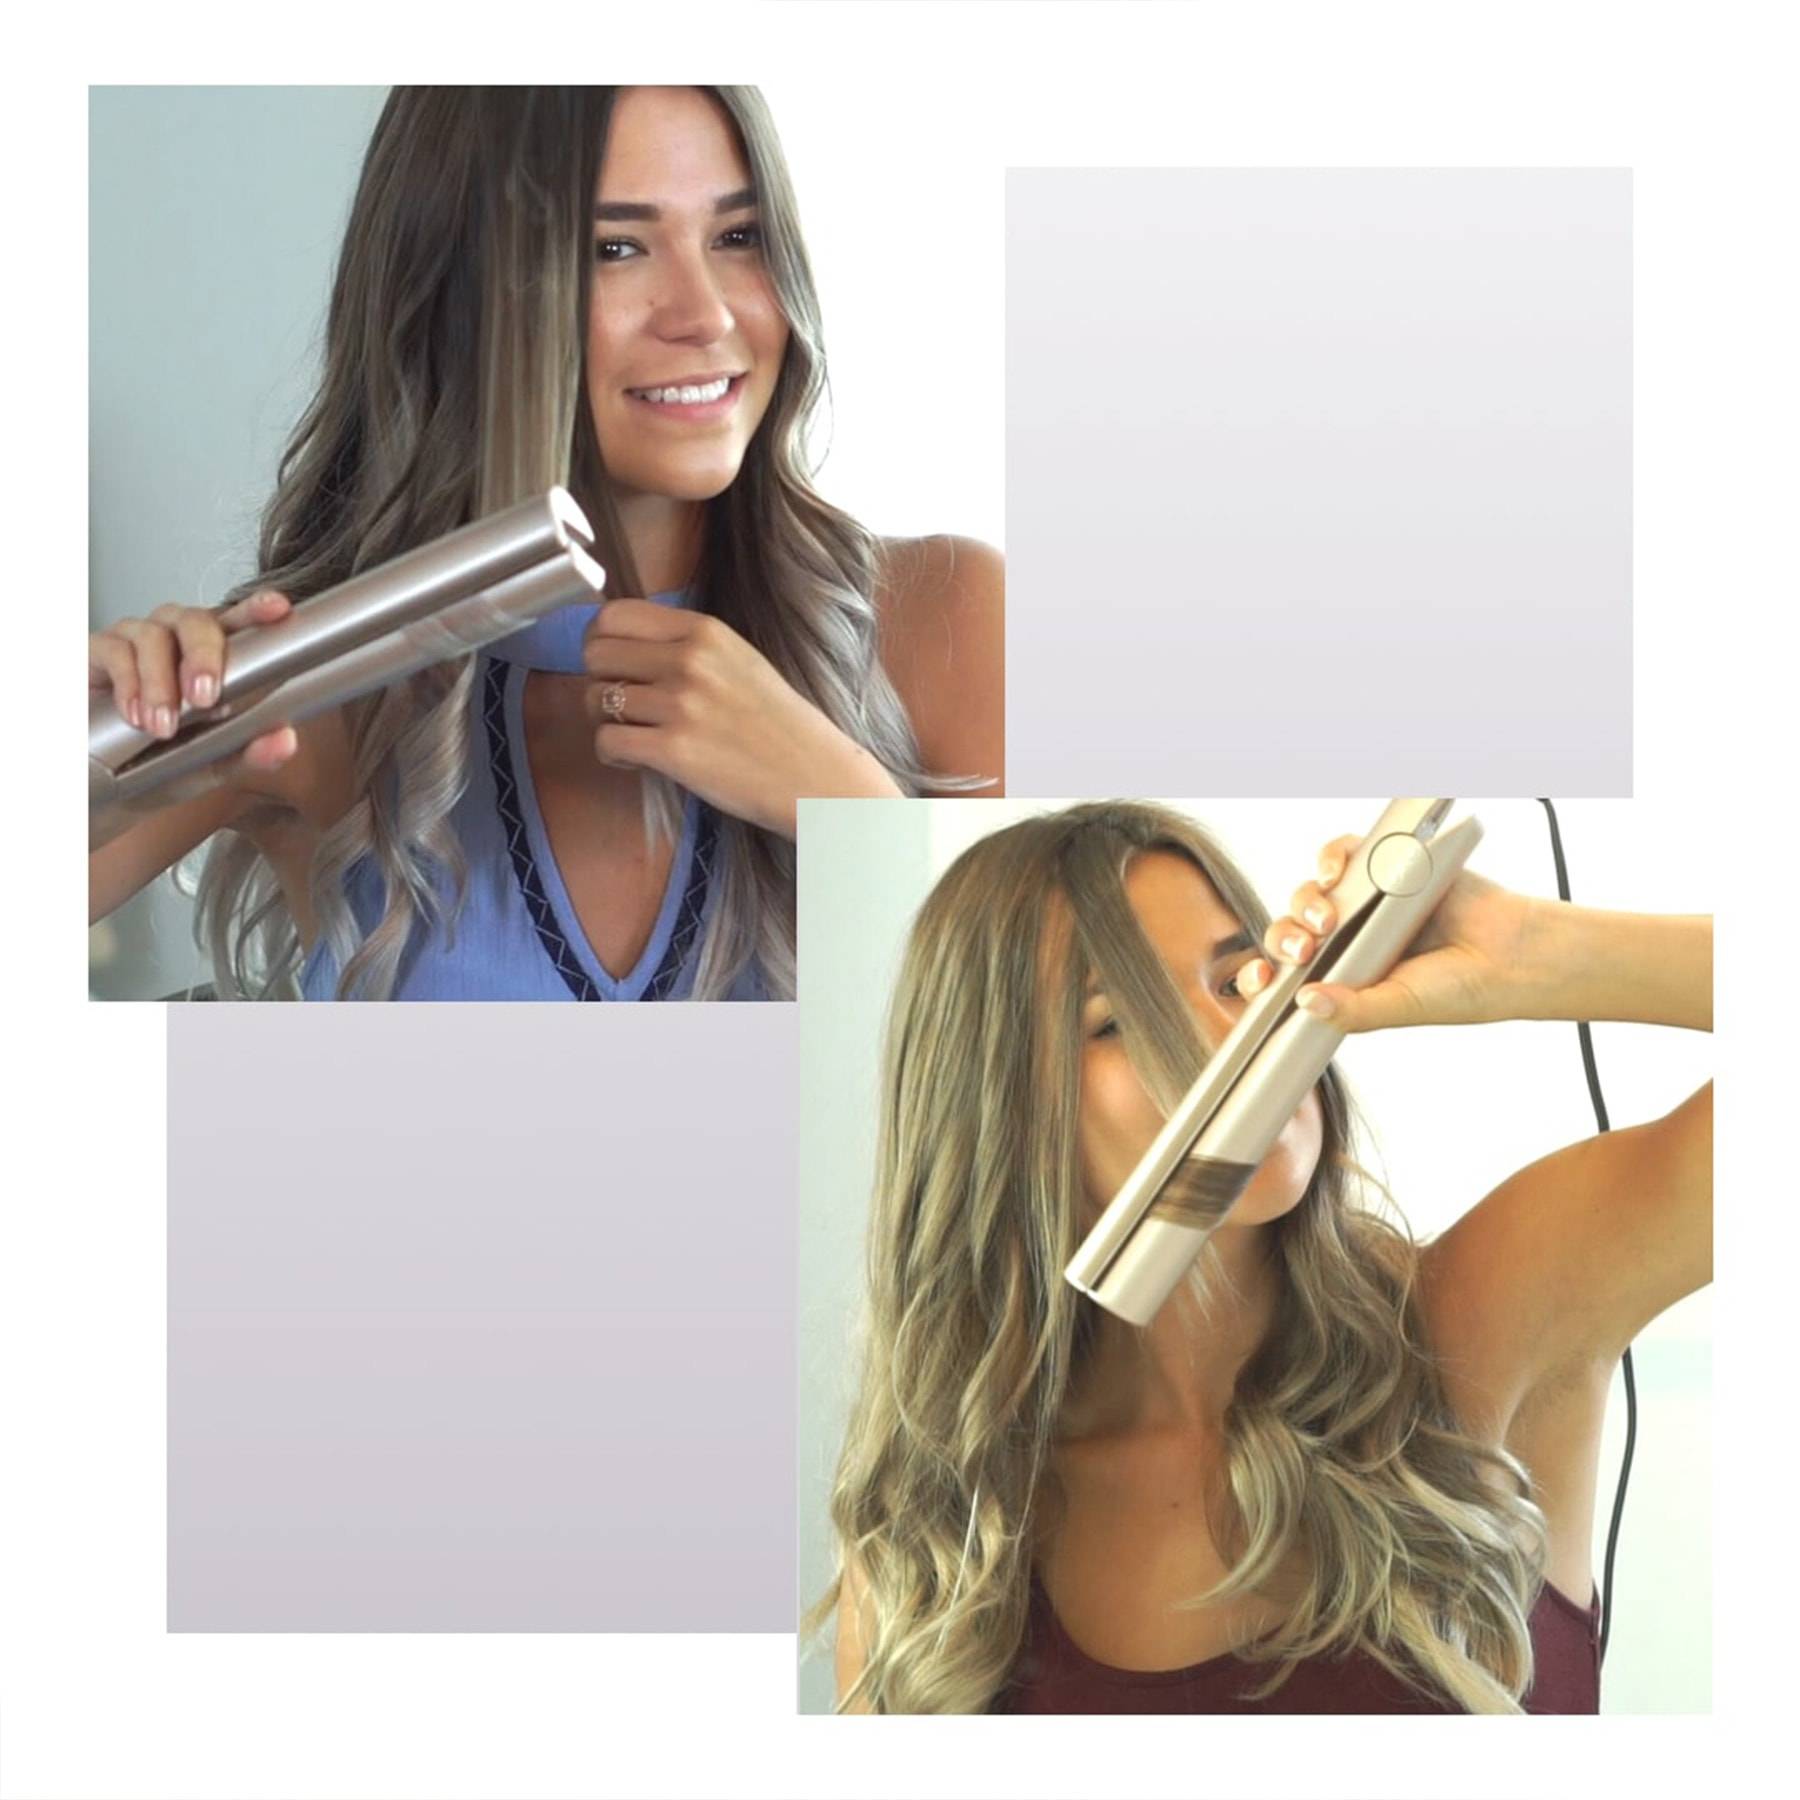 Roxy curling hair with TYME Iron Pro